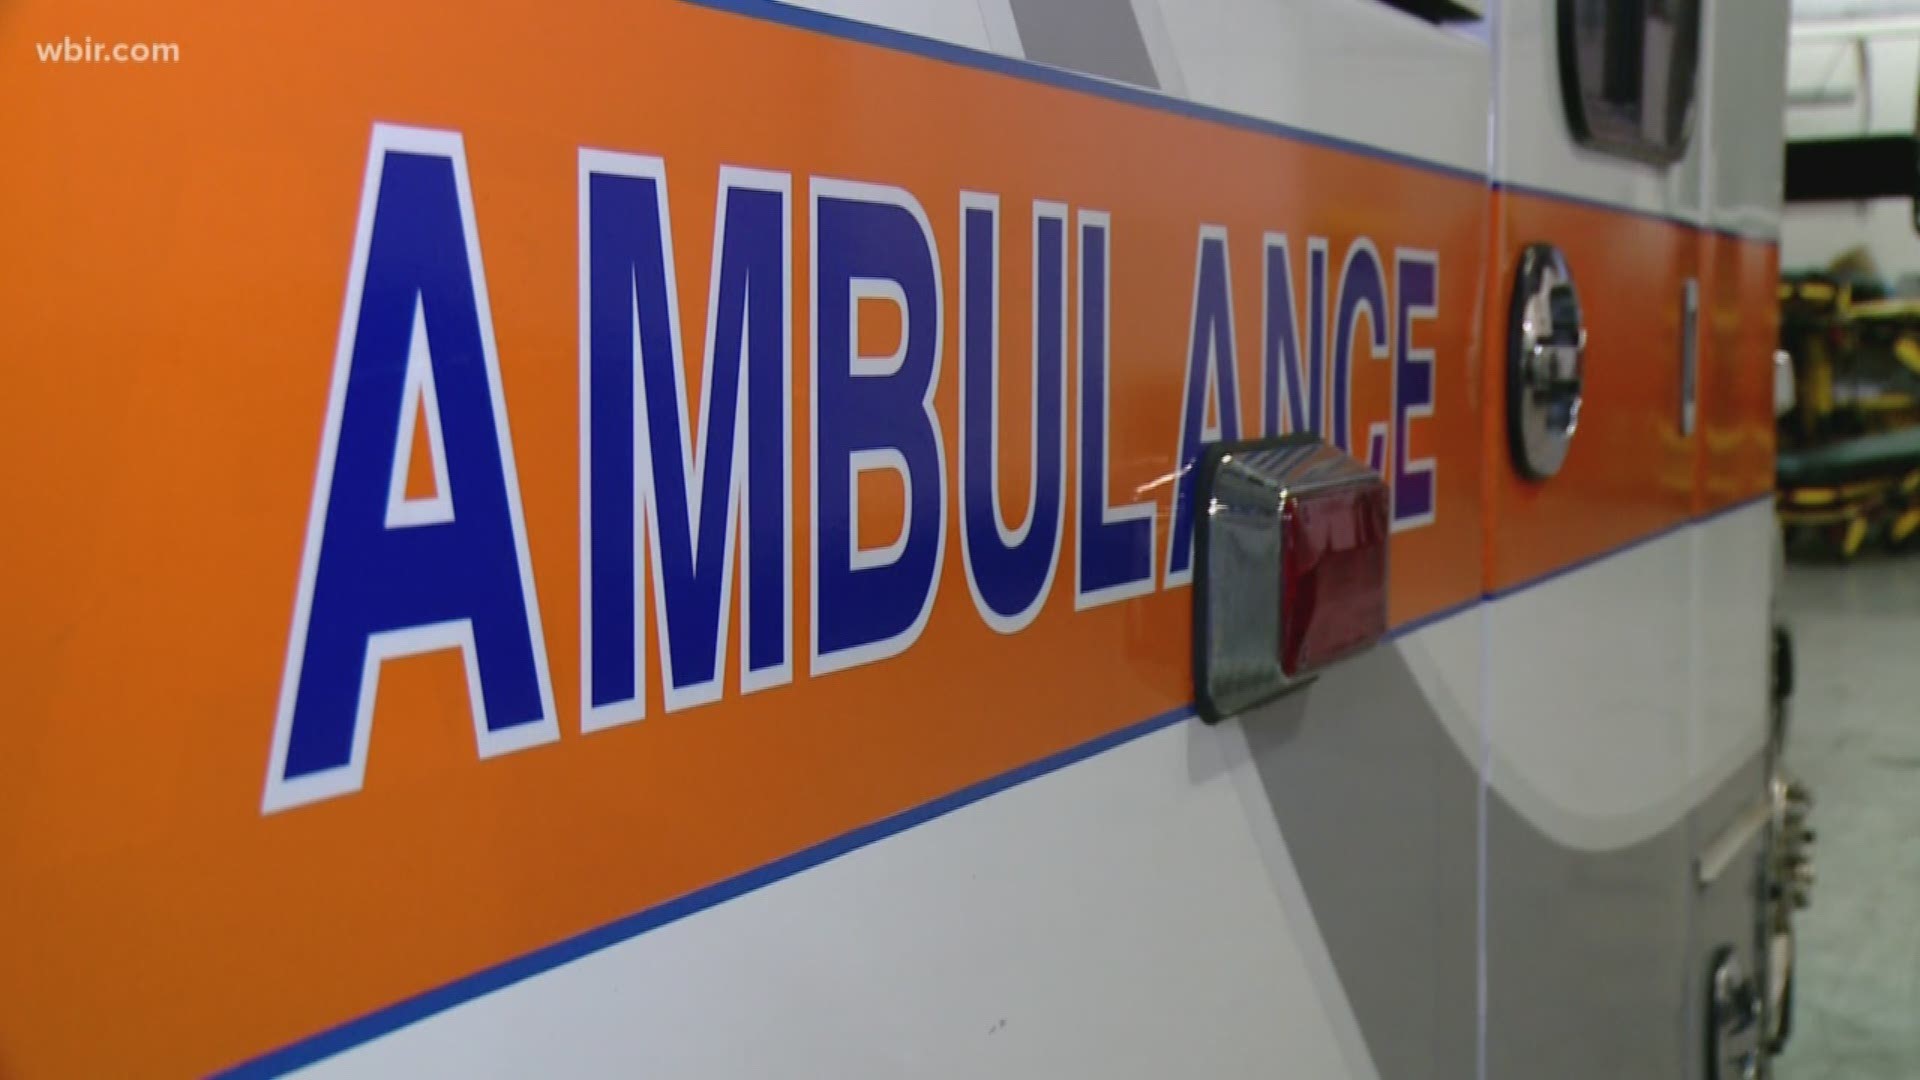 Knox County leaders and Rural Metro have agreed to change the existing ambulance service agreement for 90 days.